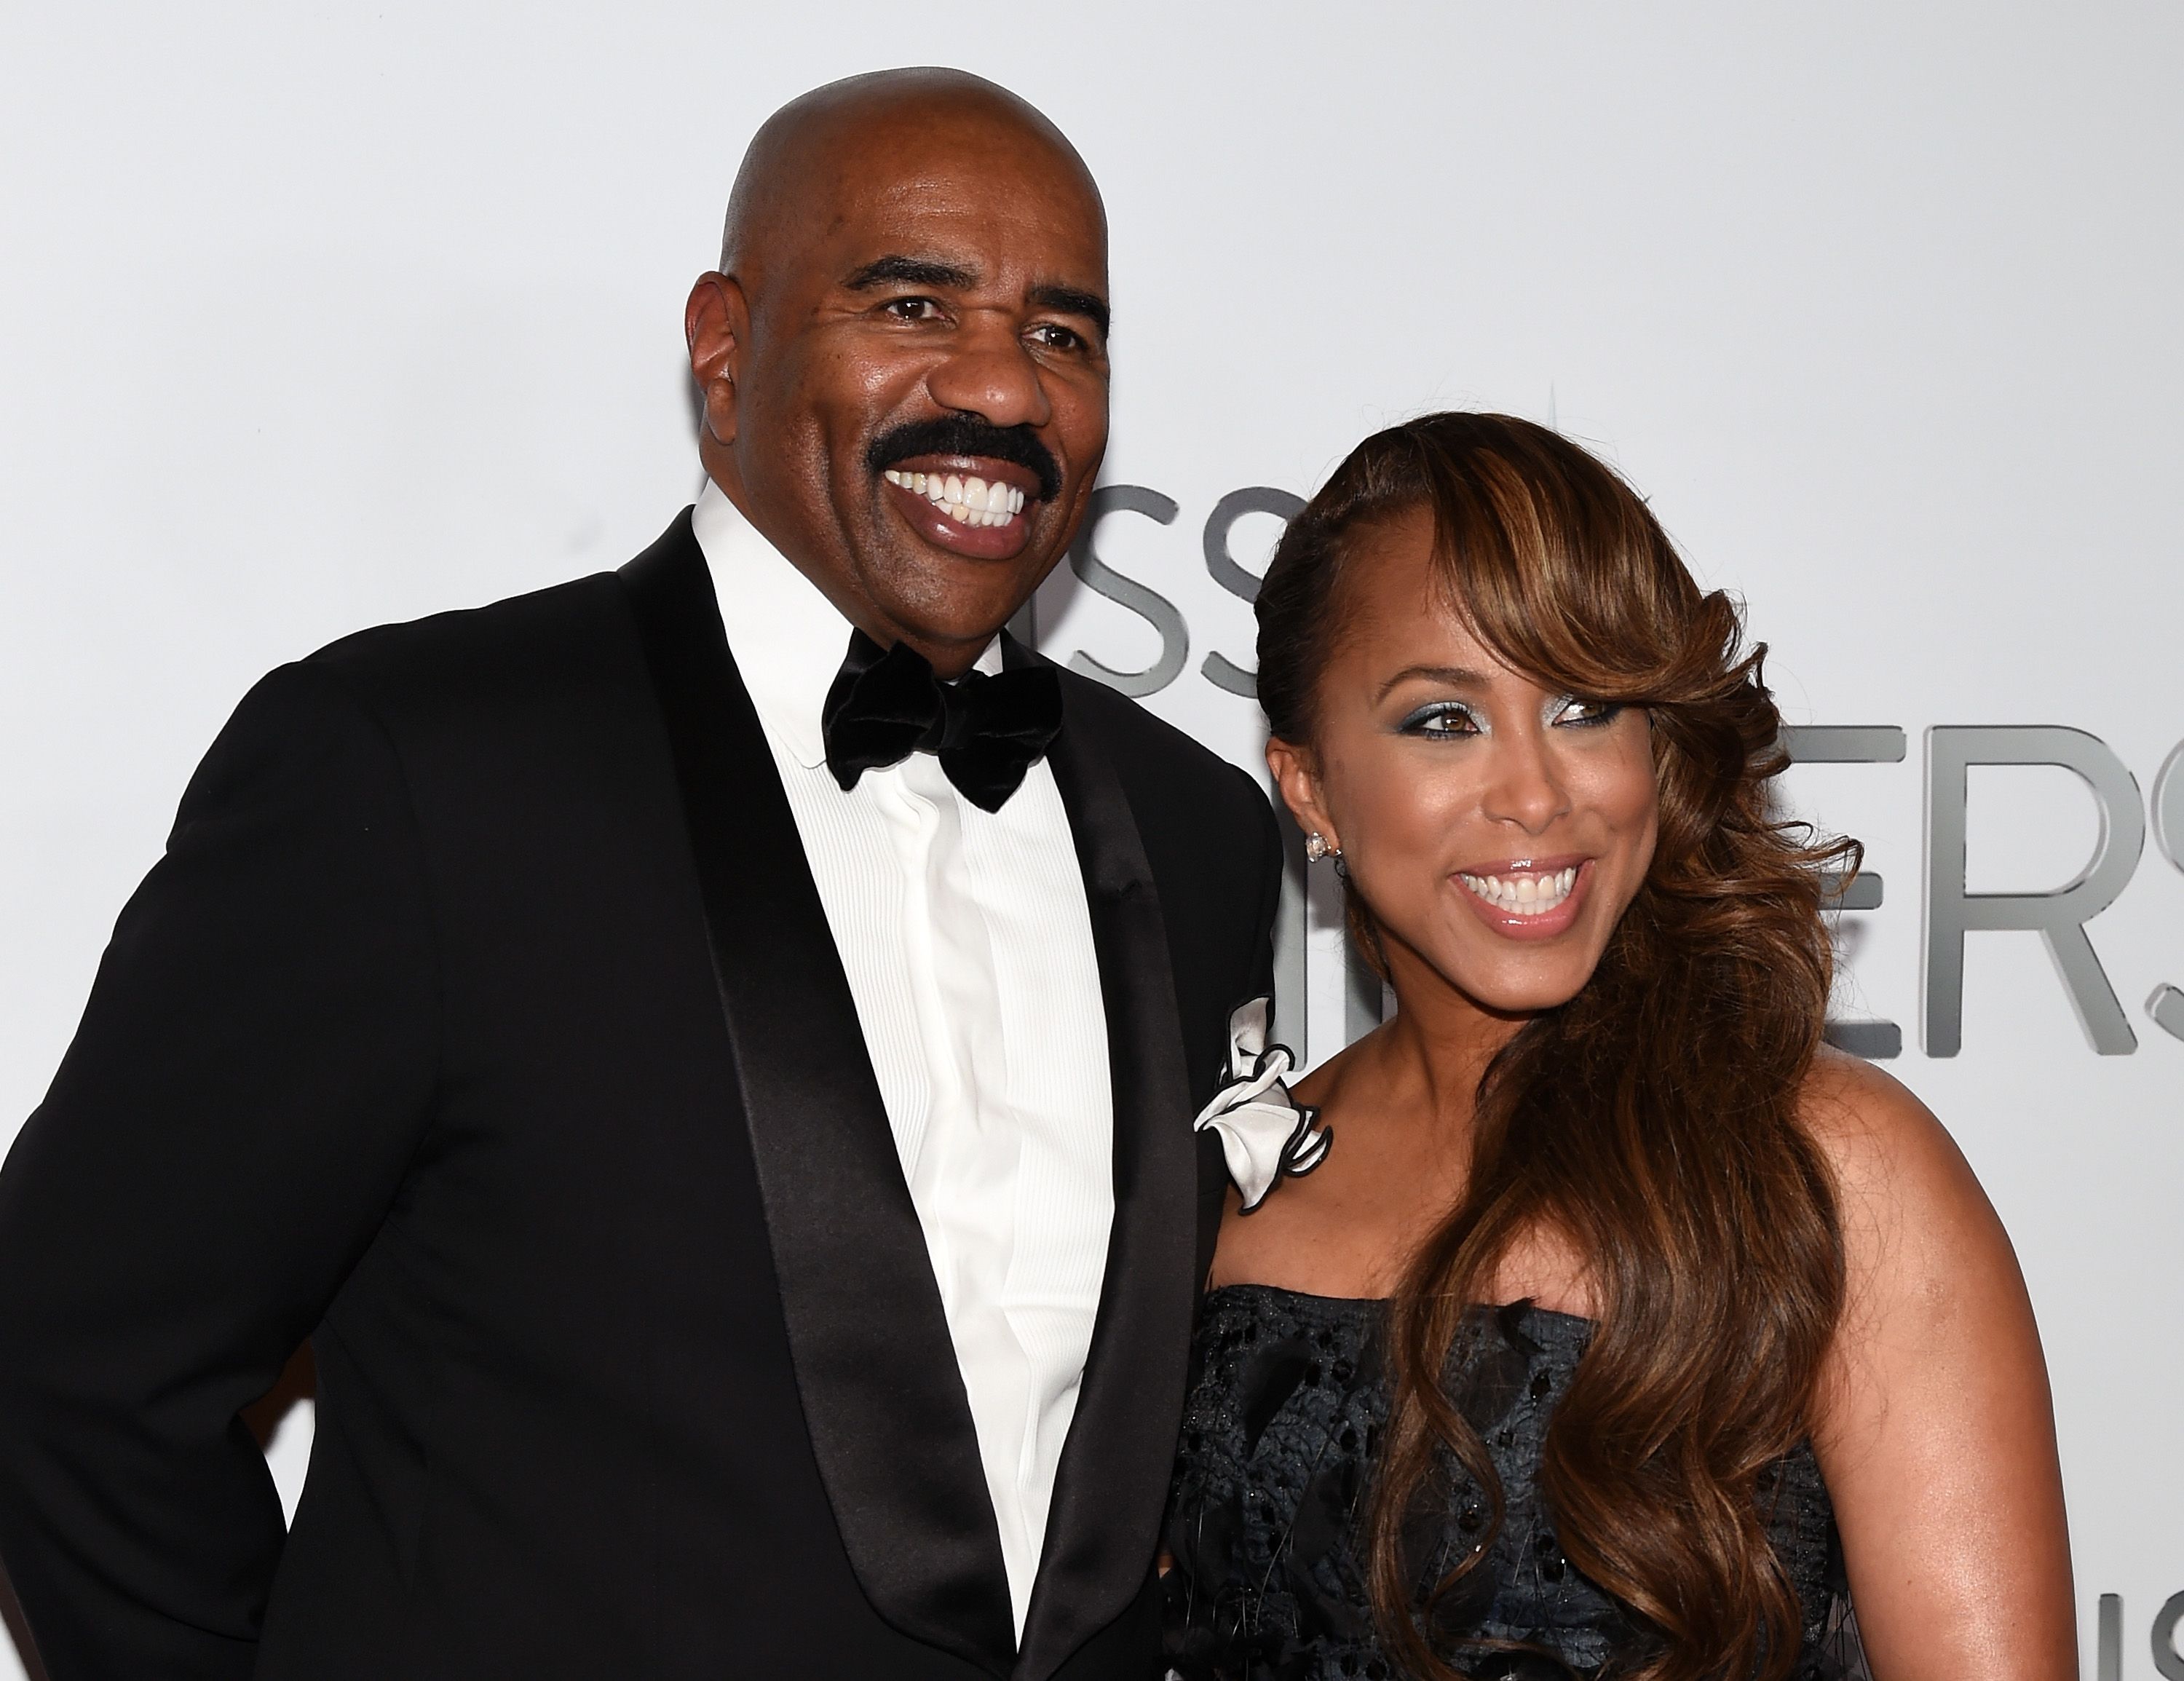 Steve Harvey and his wife Marjorie Harvey at the 2015 Miss Universe Pageant at Planet Hollywood Resort & Casino on December 20, 2015. | Photo: Getty Images